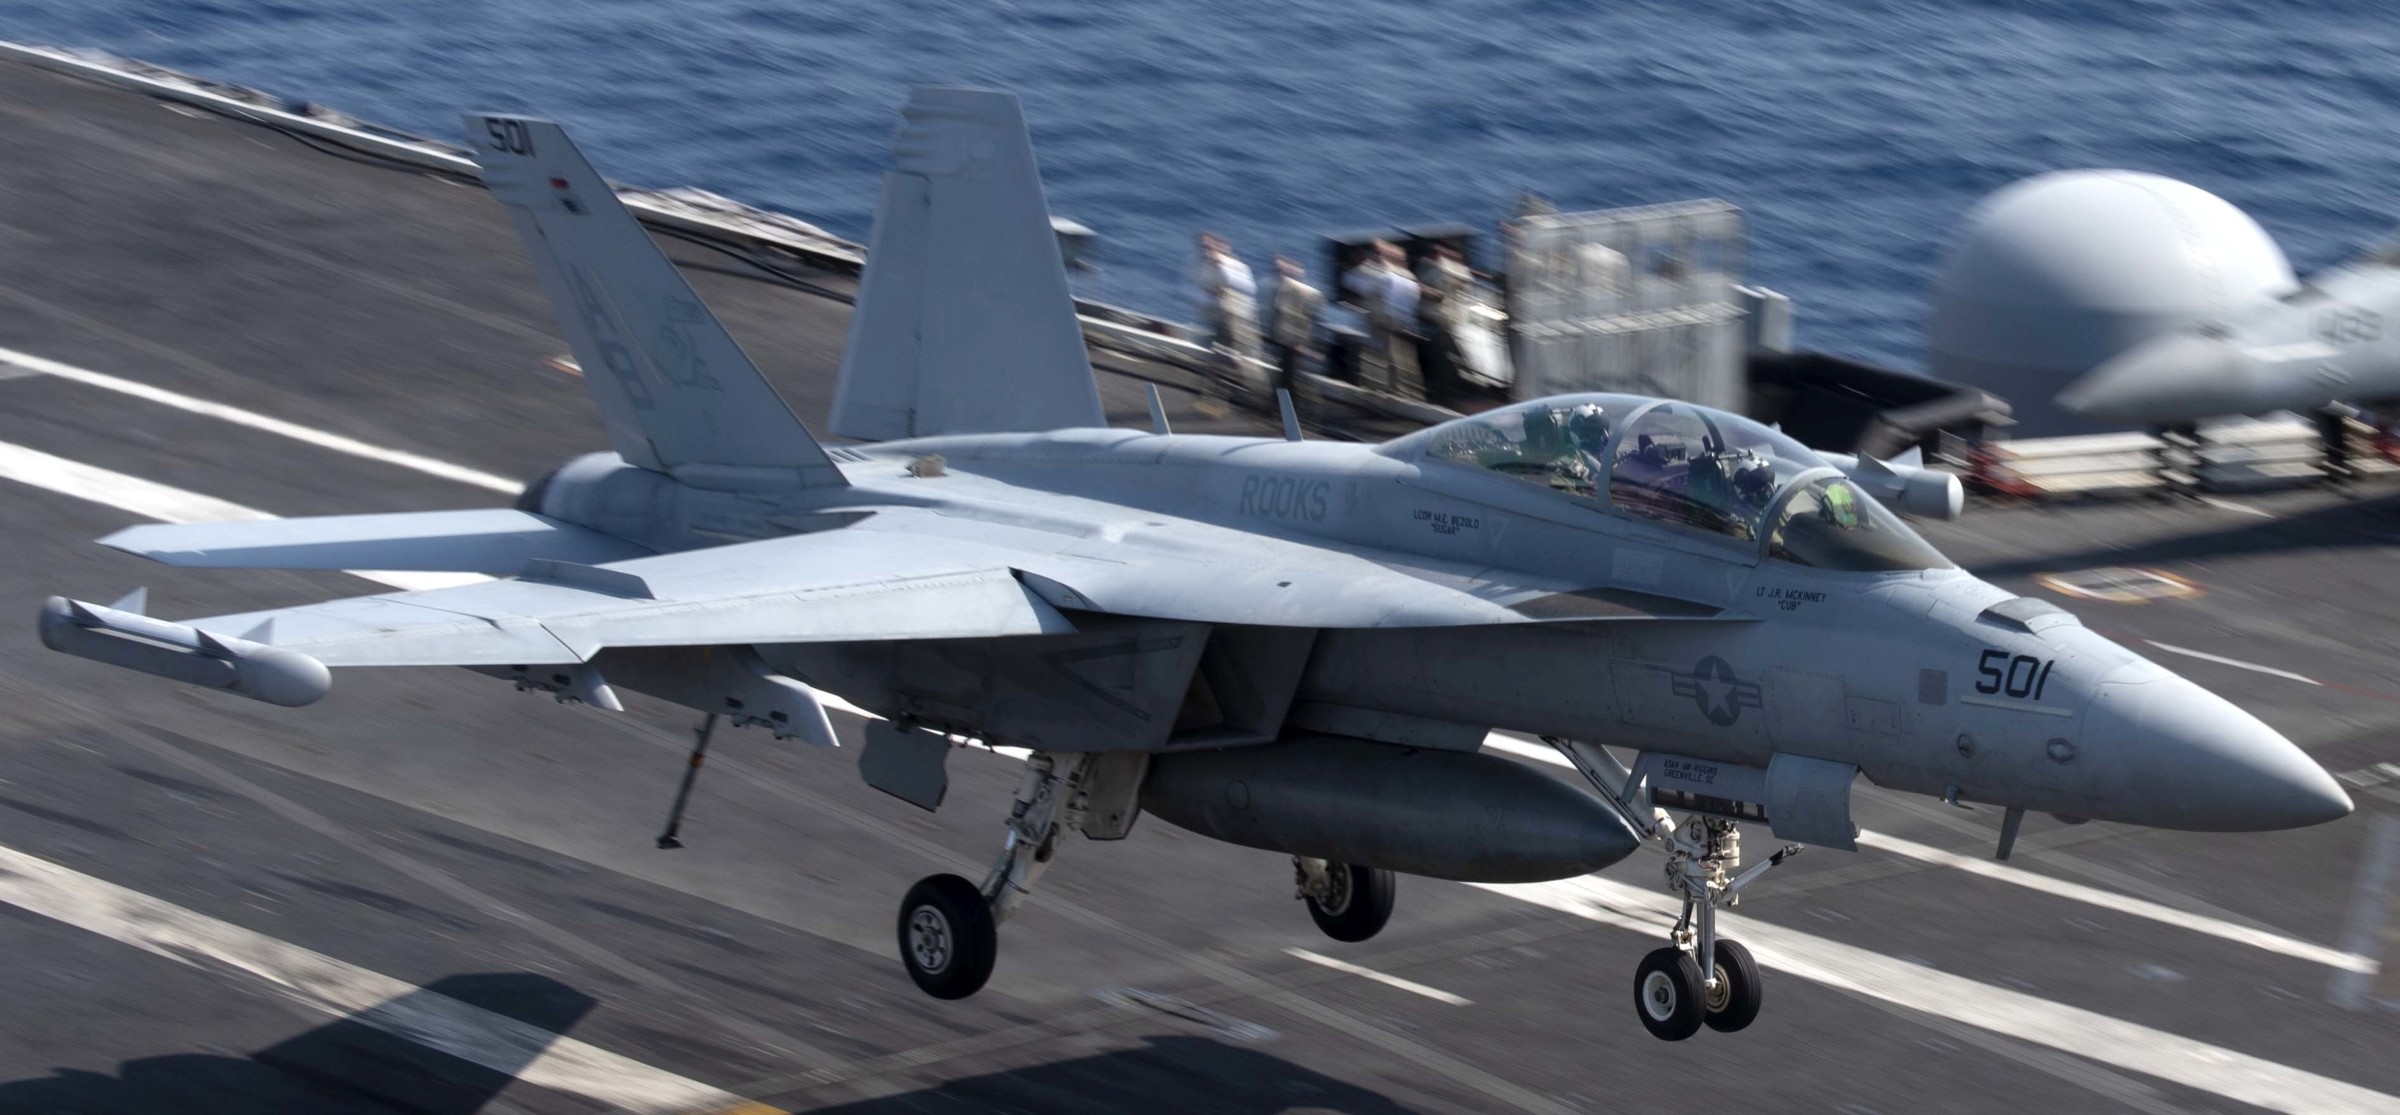 vaq-137 rooks electronic attack squadron us navy ea-18g growler carrier air wing cvw-1 uss harry s. truman cvn-75 77